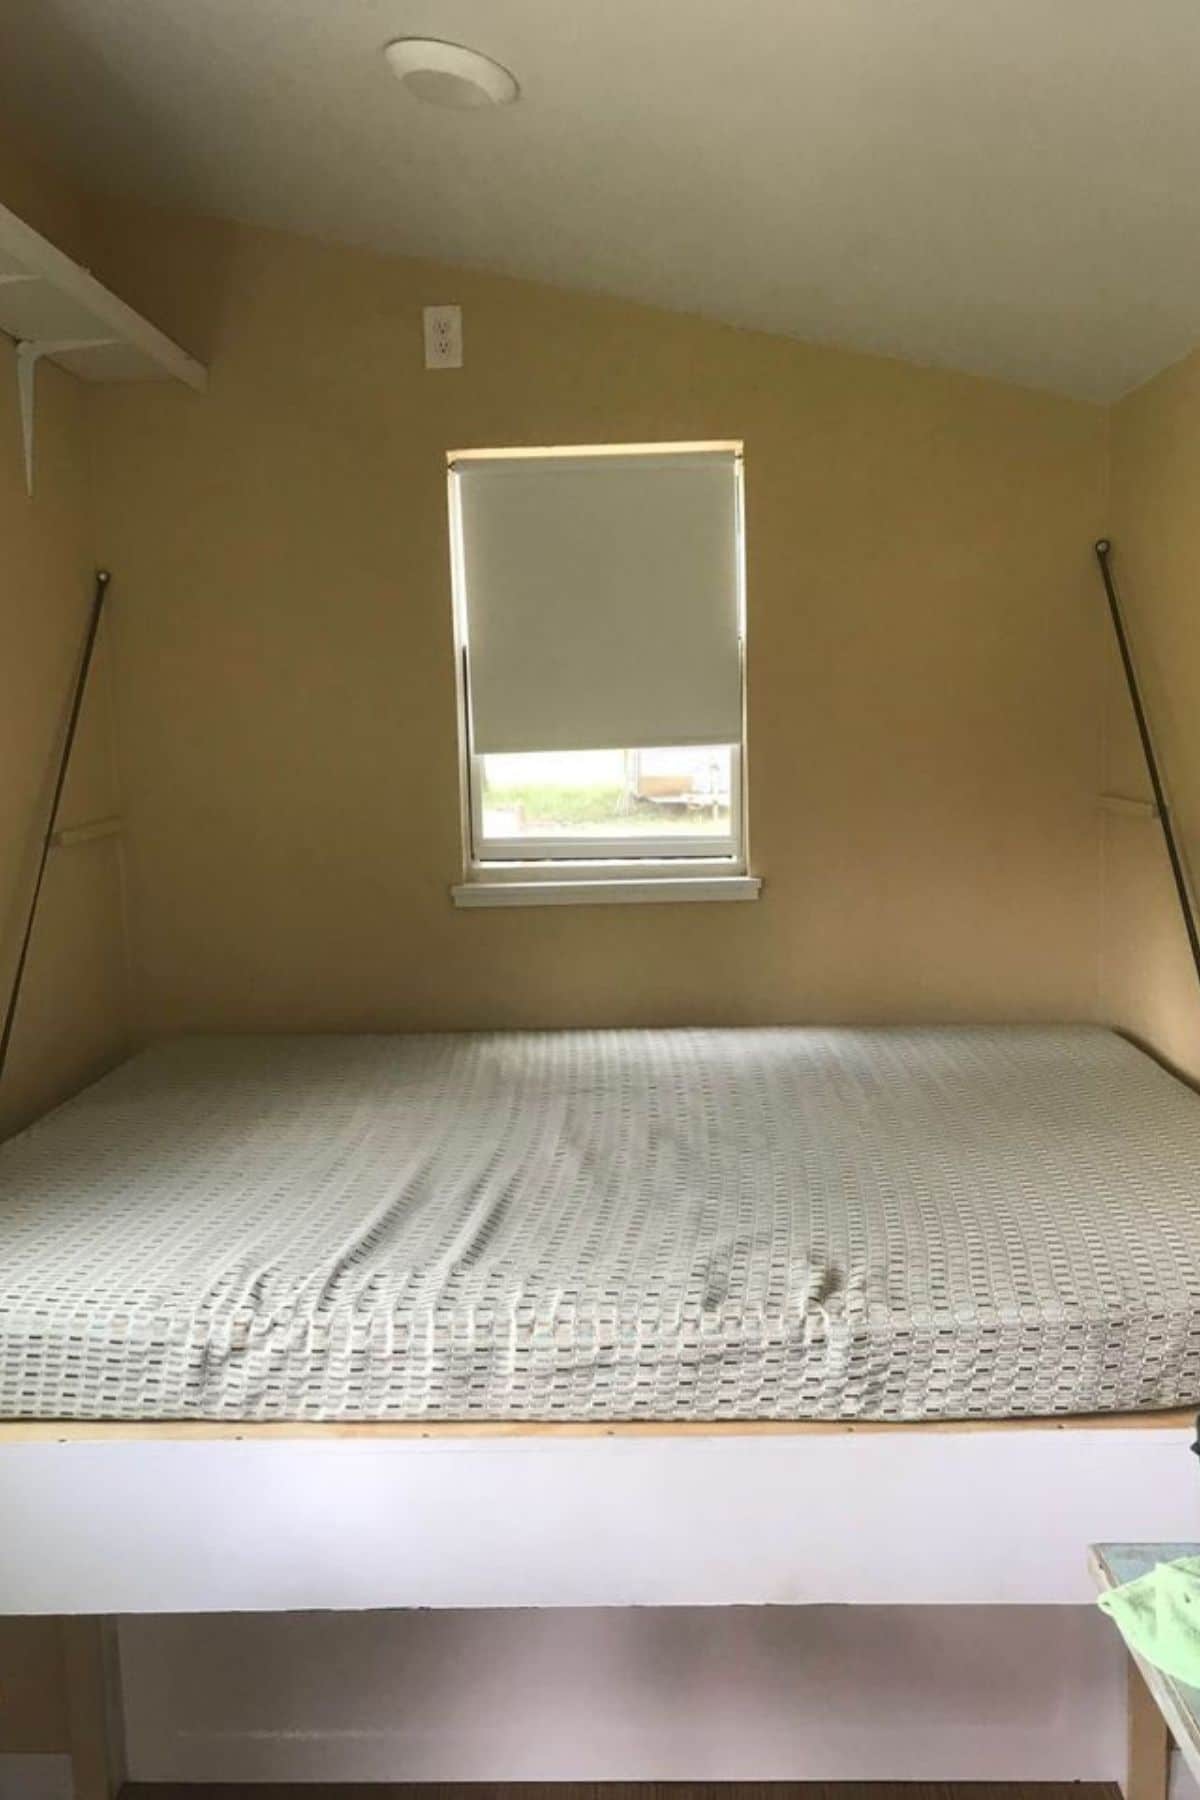 Murphy bed against cream wall with chain holding bed to wall